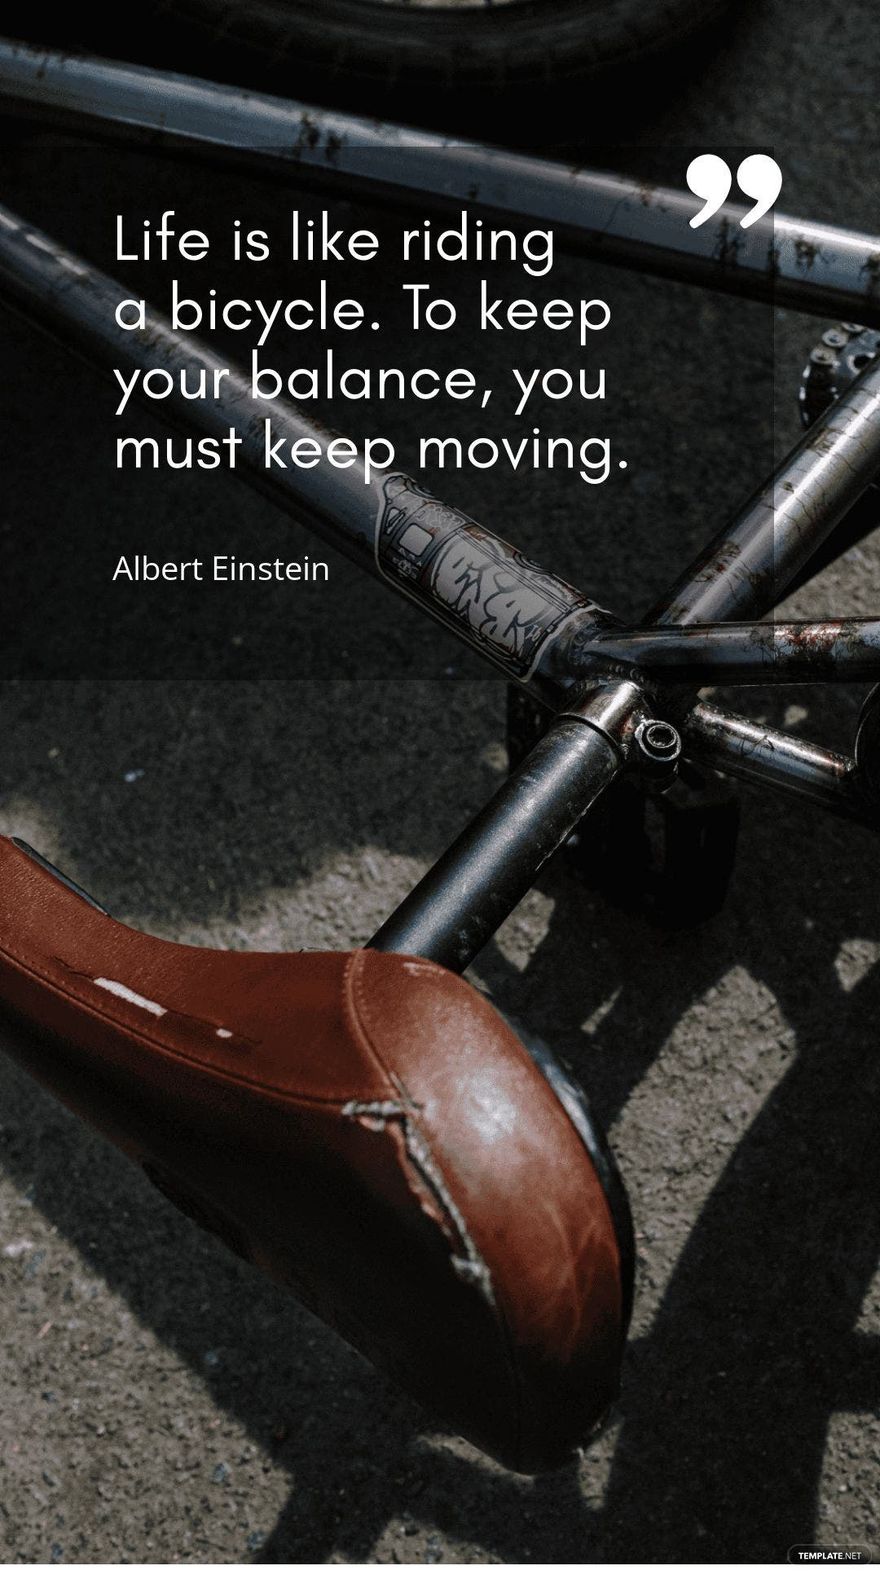 Albert Einstein - Life is like riding a bicycle. To keep your balance, you must keep moving.